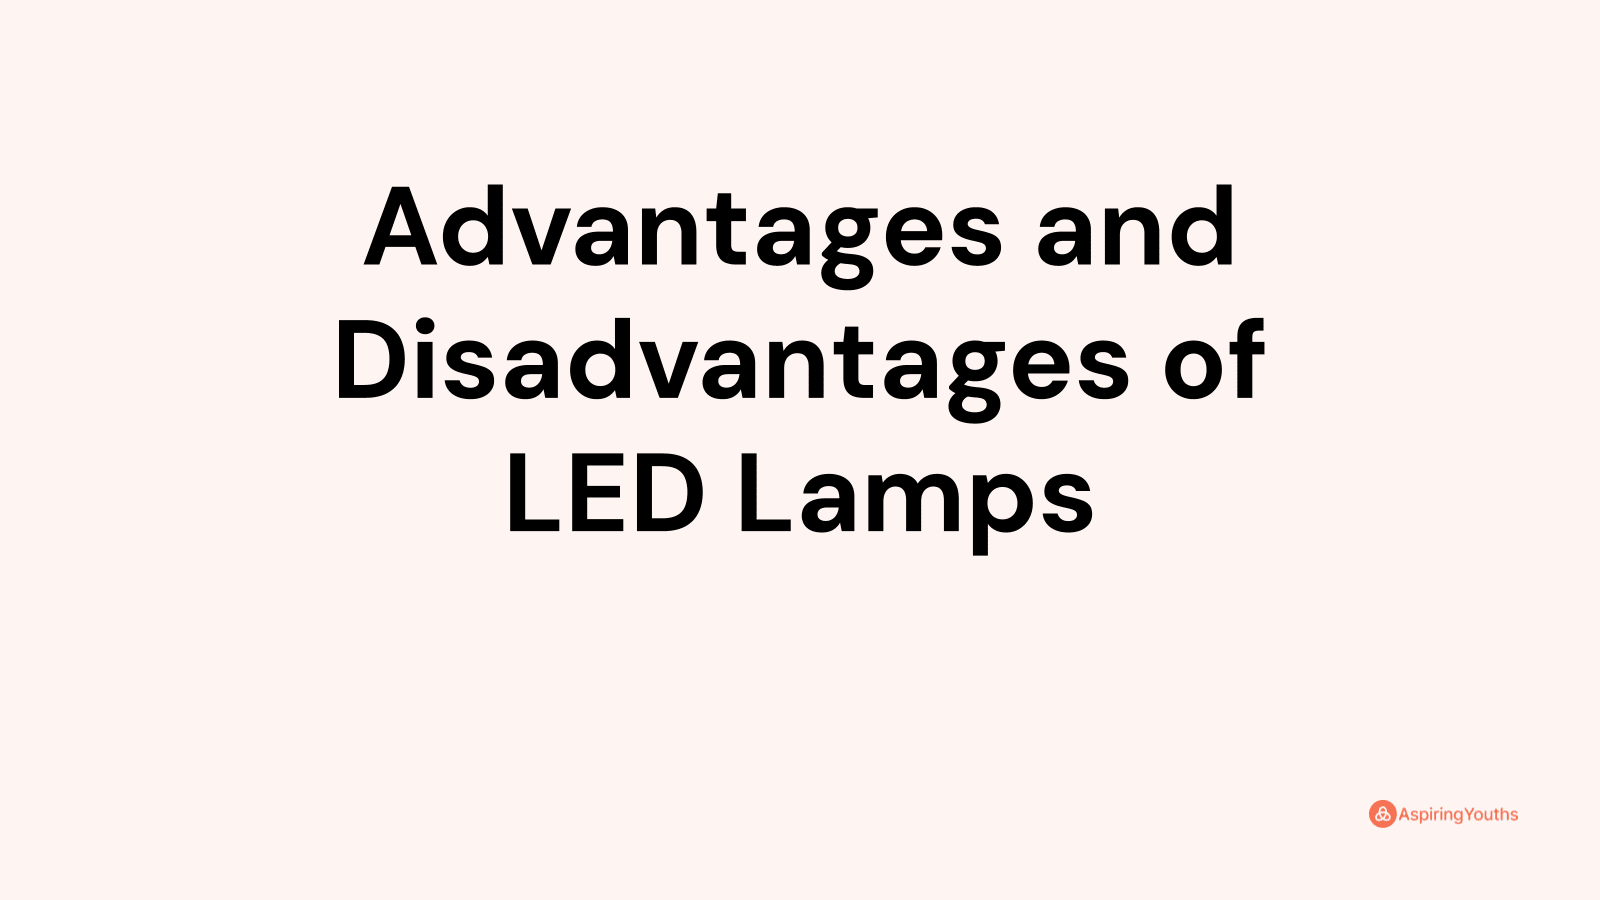 Advantages and Disadvantages of LED Lamps